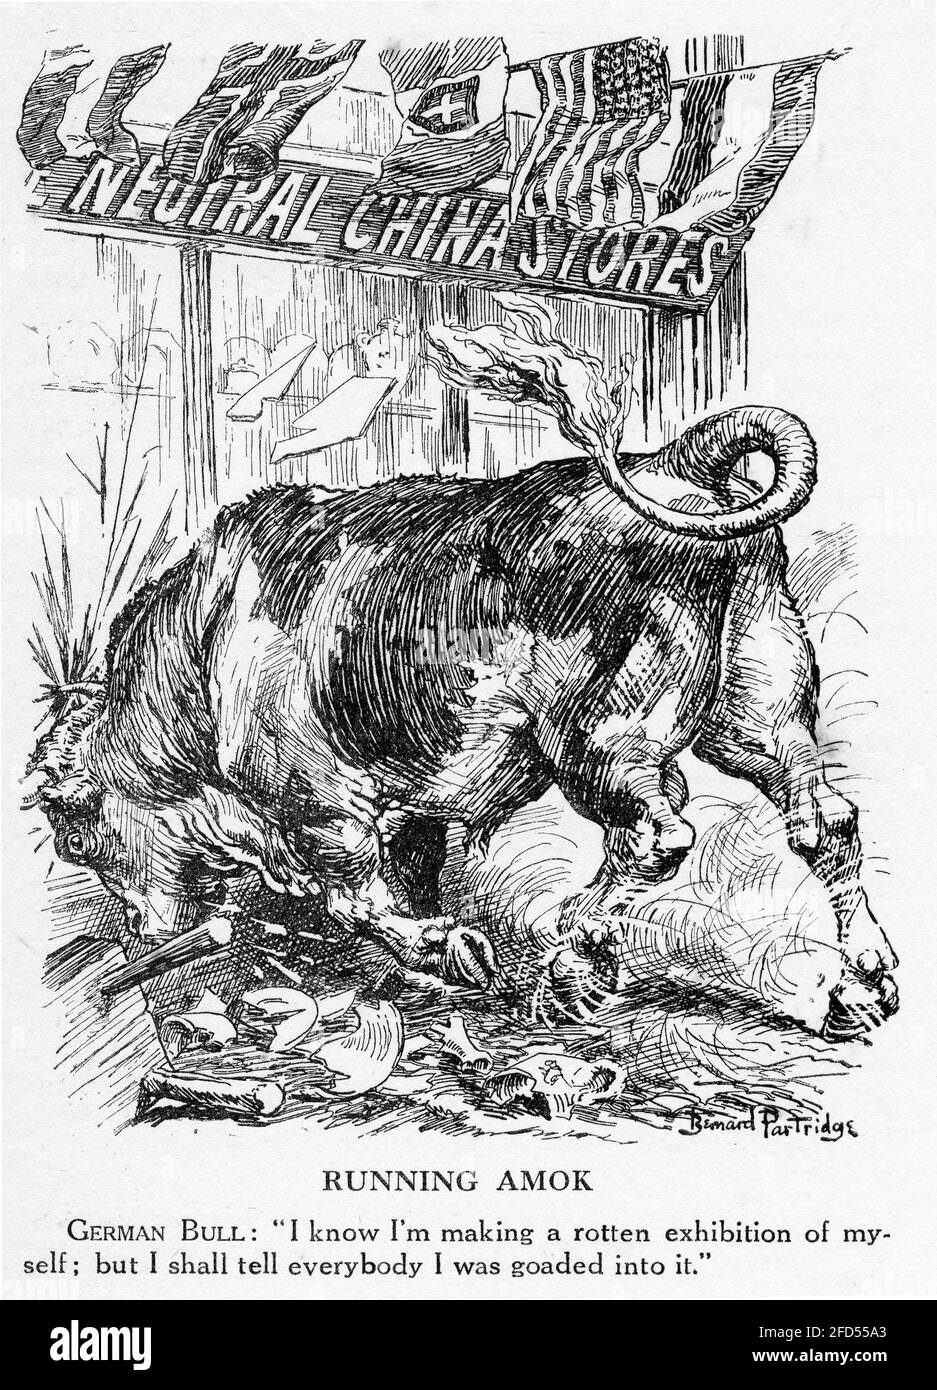 Engraving of A German bull in a China Shop, mocking Germany's justification for war to the neutral countries. From Punch magazine. Stock Photo